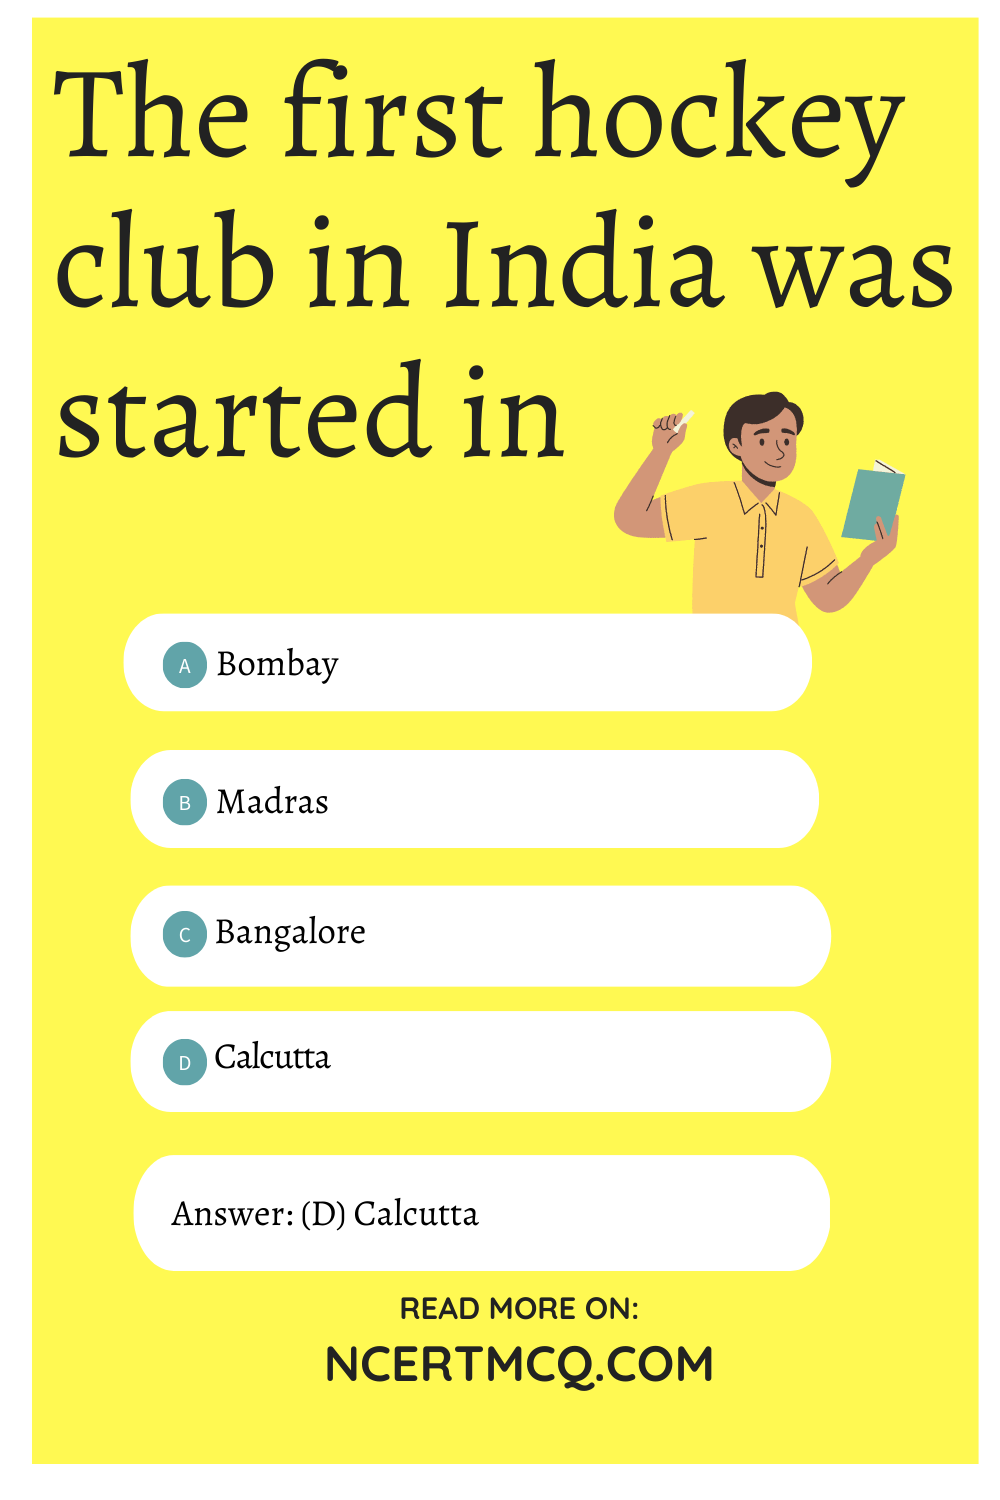 The first hockey club in India was started in